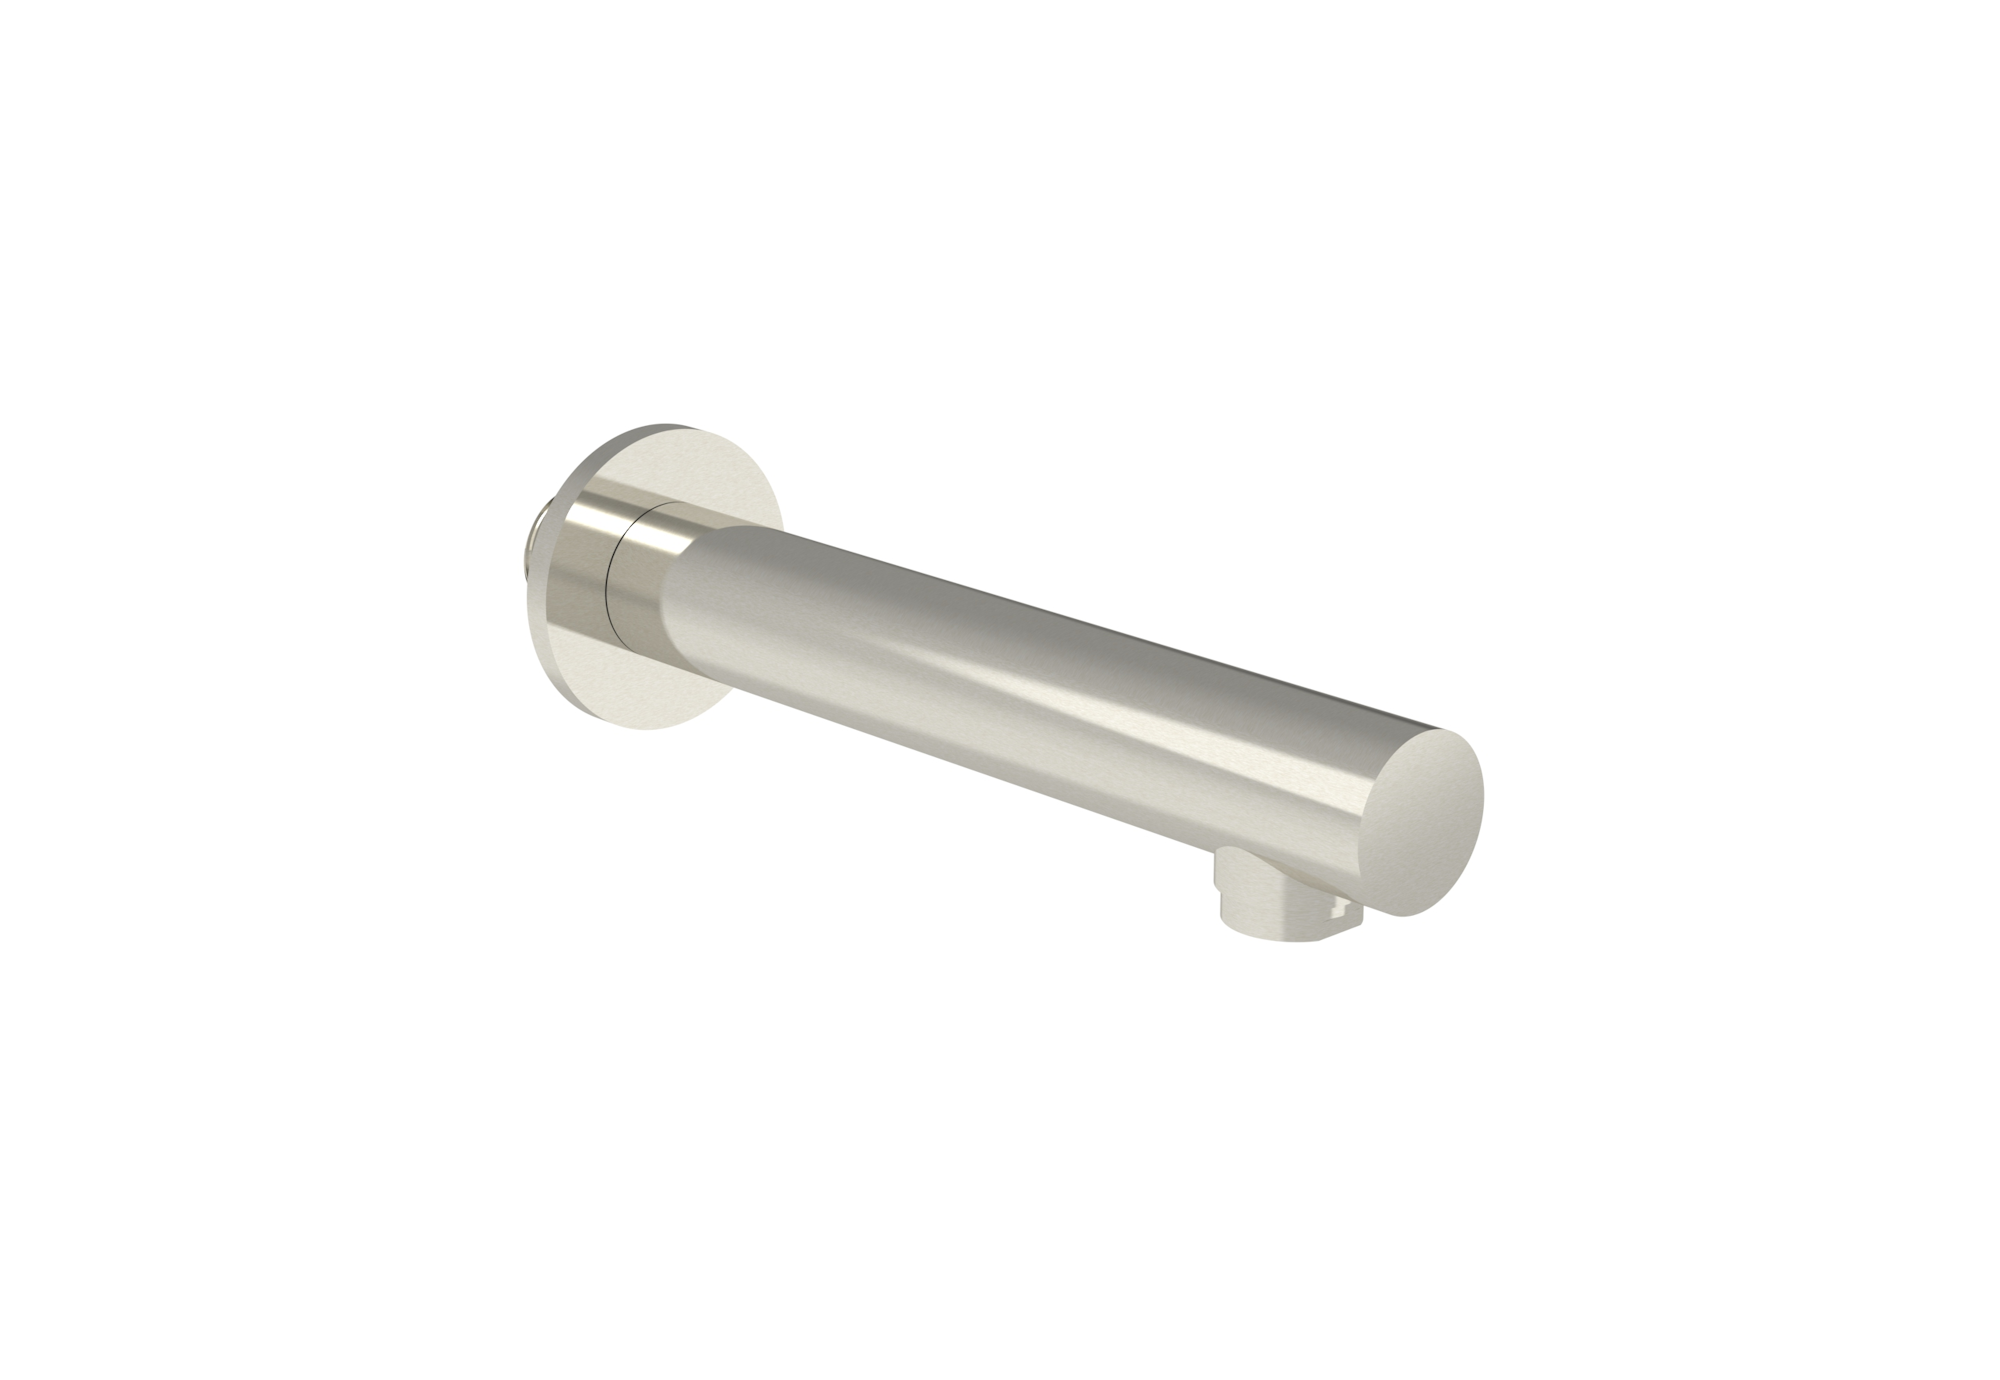 COS 220mm round bath spout - Brushed Nickel